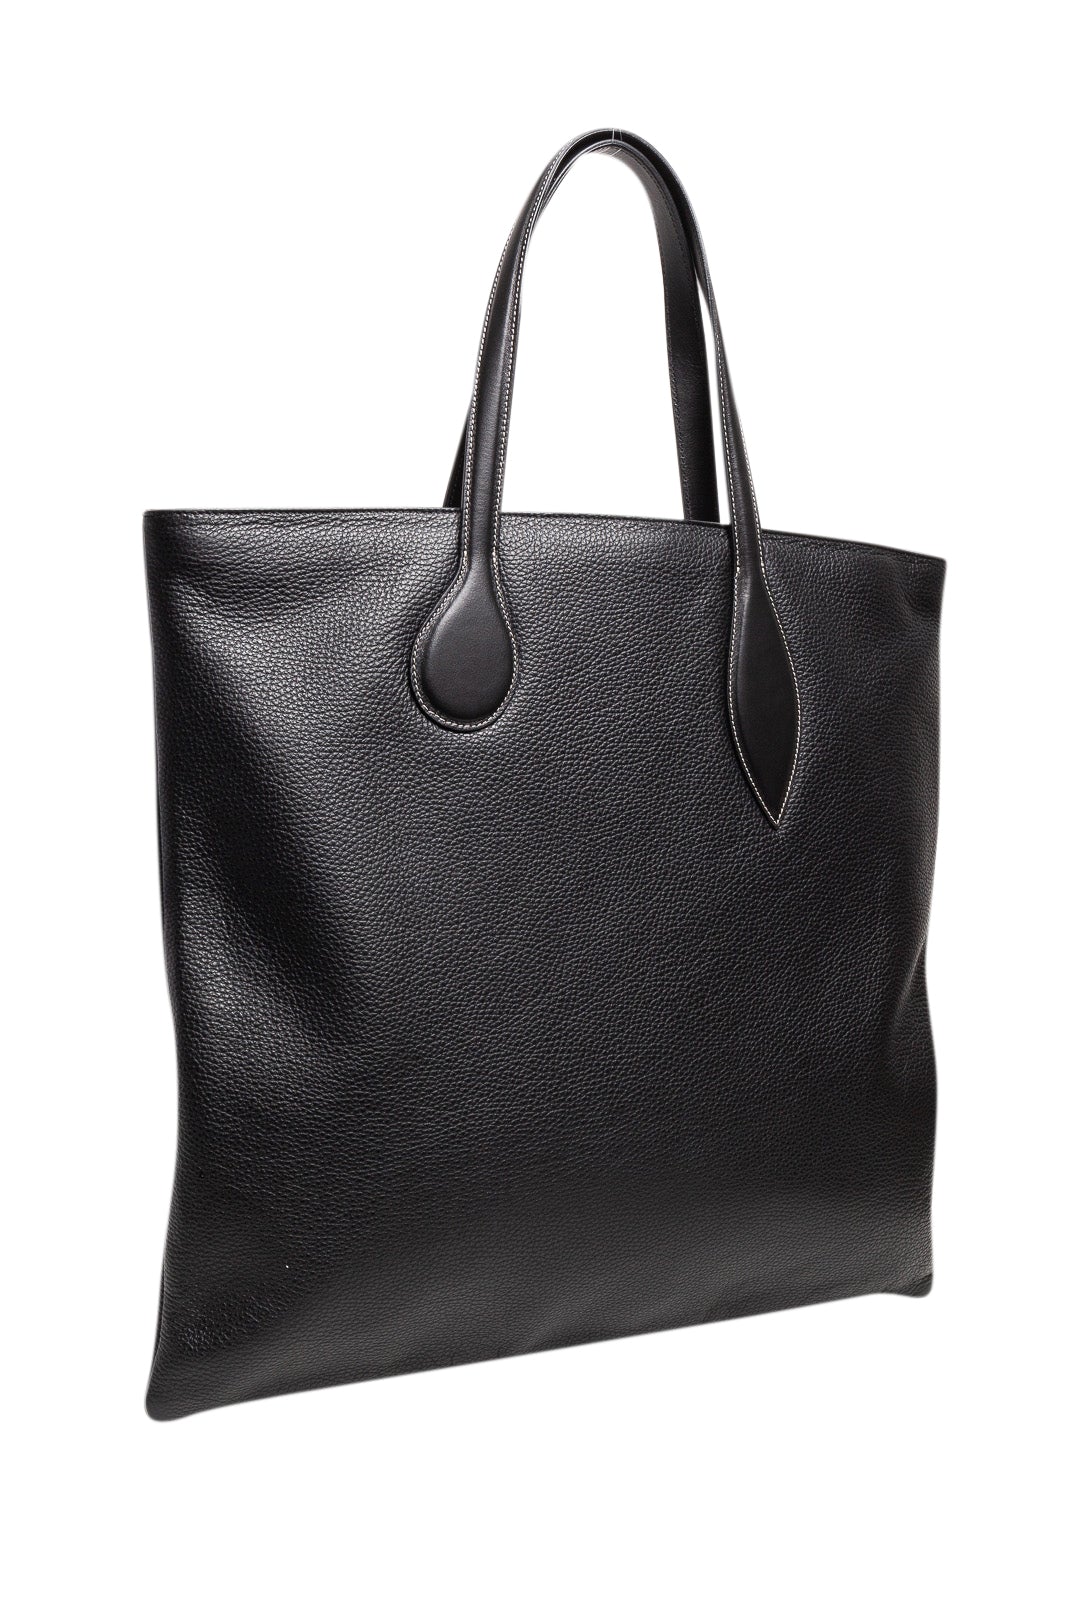 LITTLE LIFFNER-Leather tote bag-CR3579-1-dgallerystore